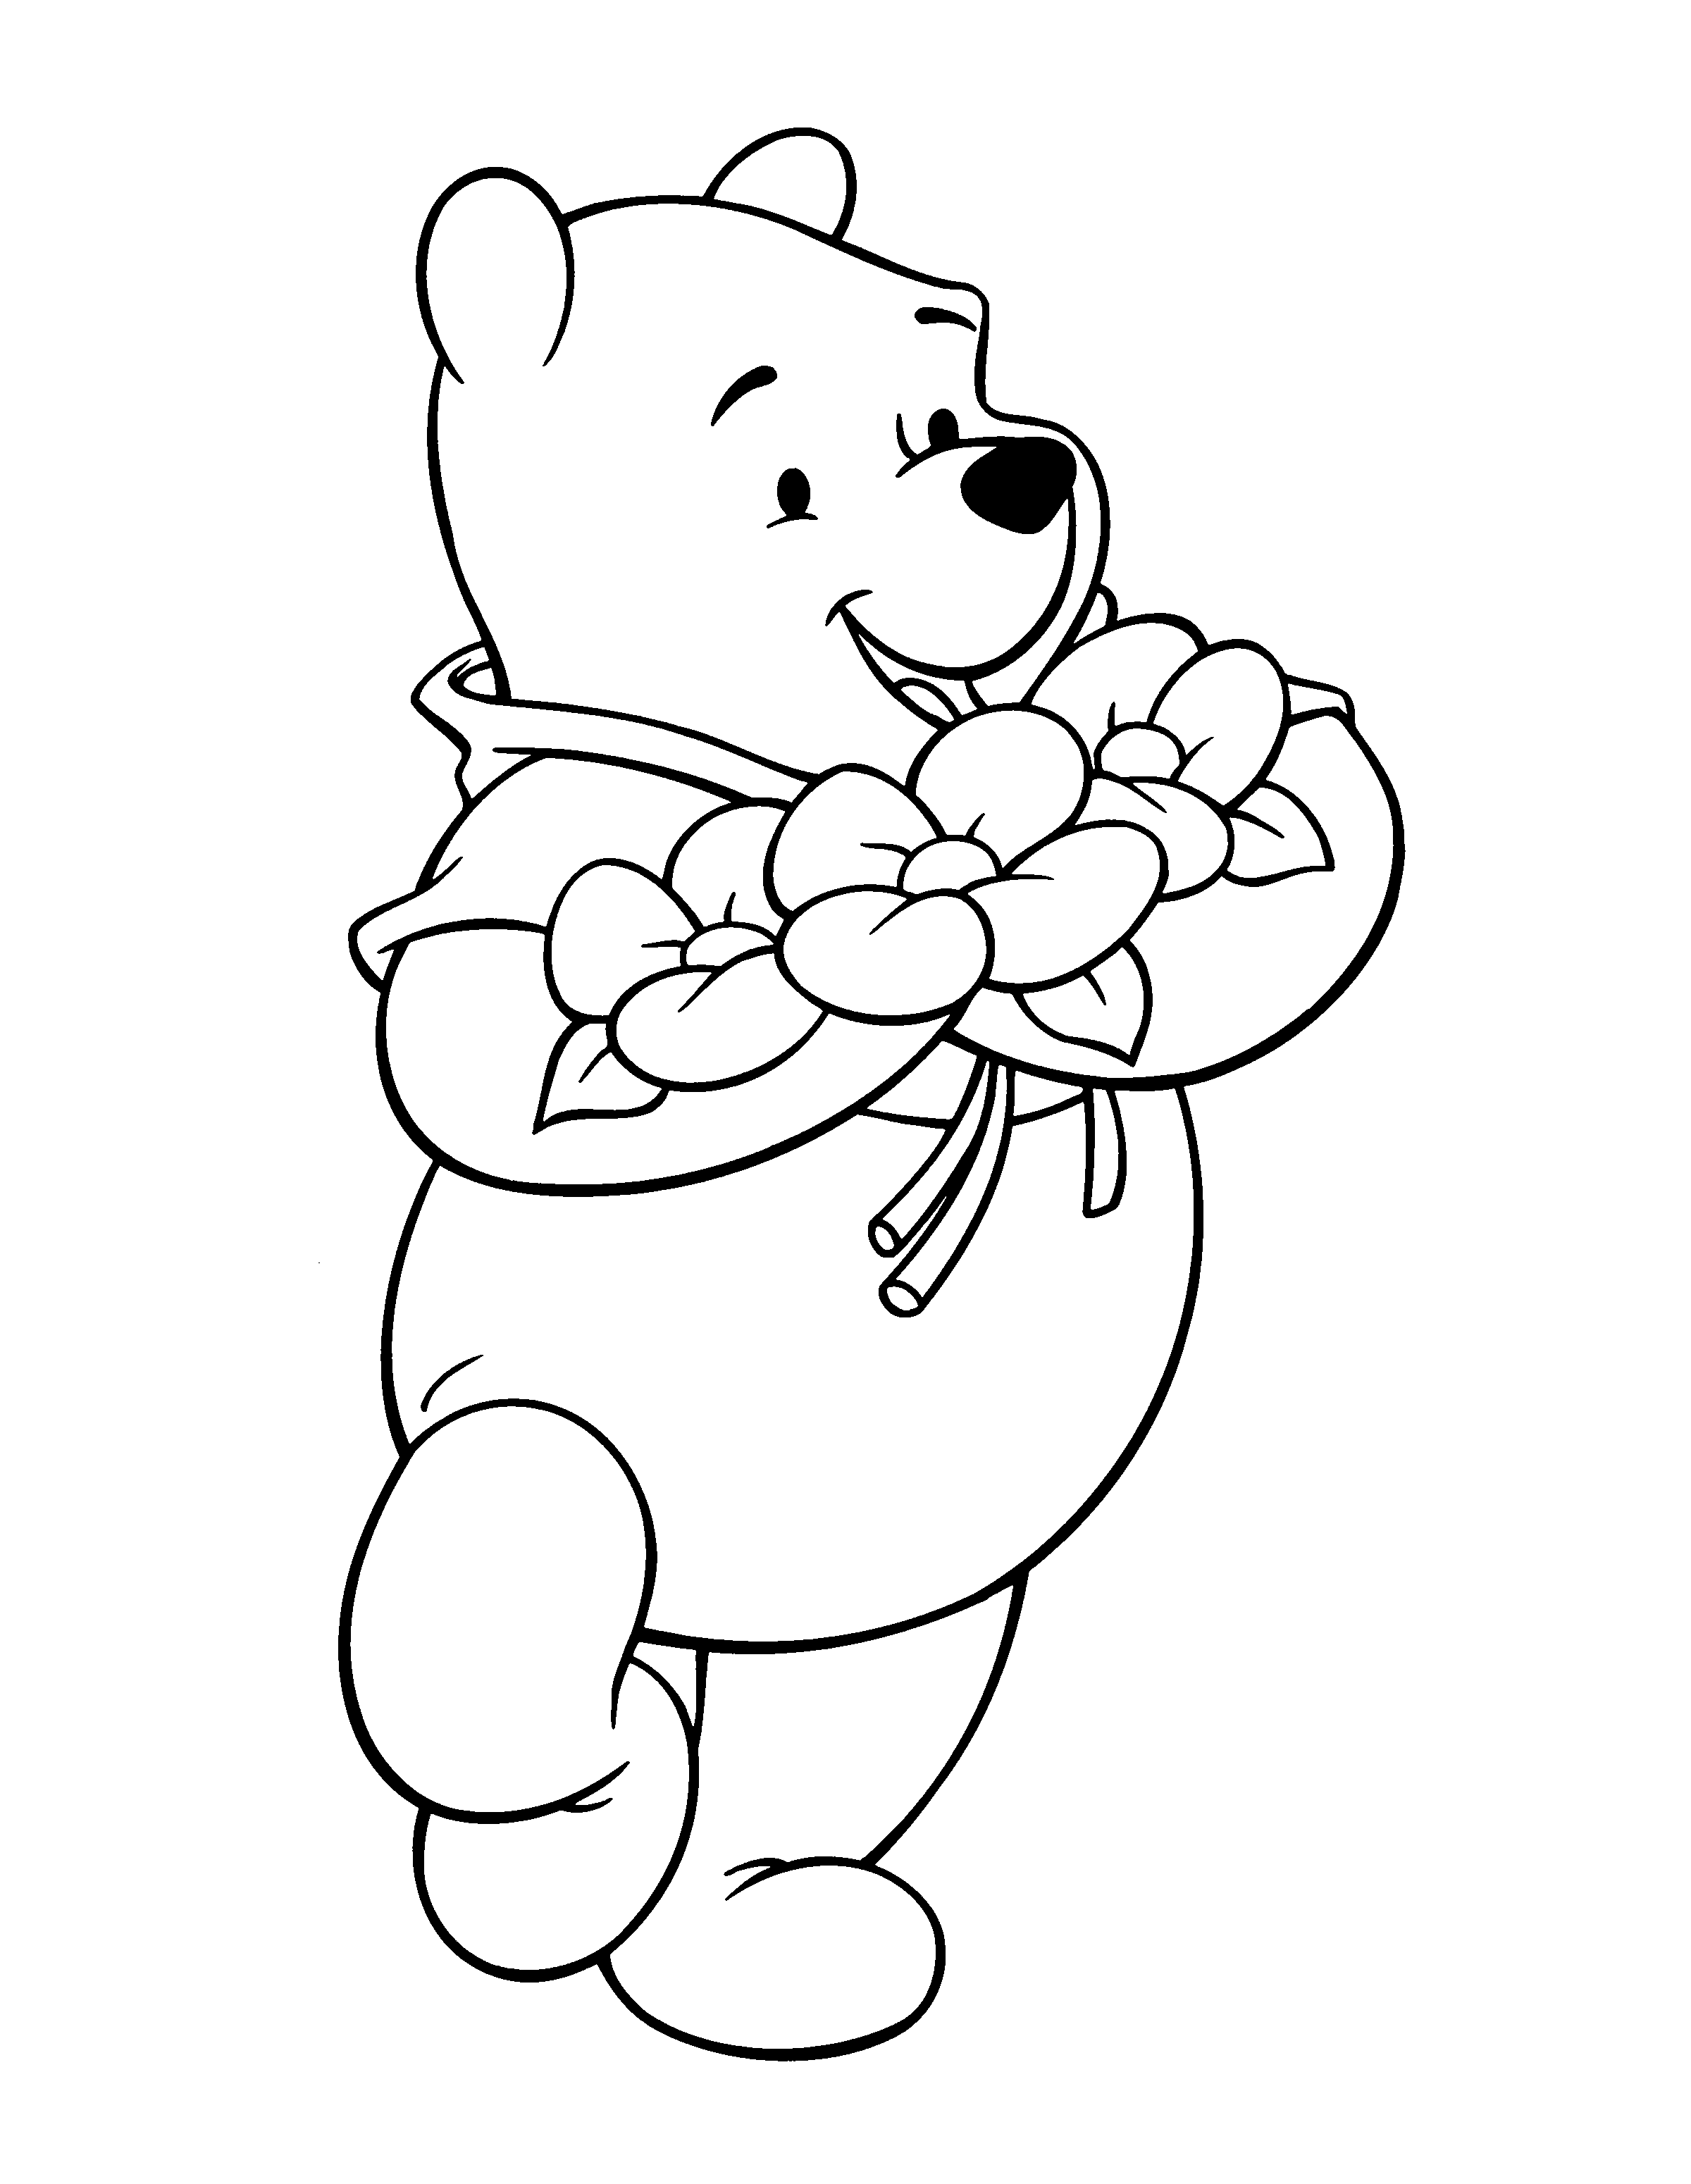 cute winnie the pooh black and white thanksgiving clipart 20 free